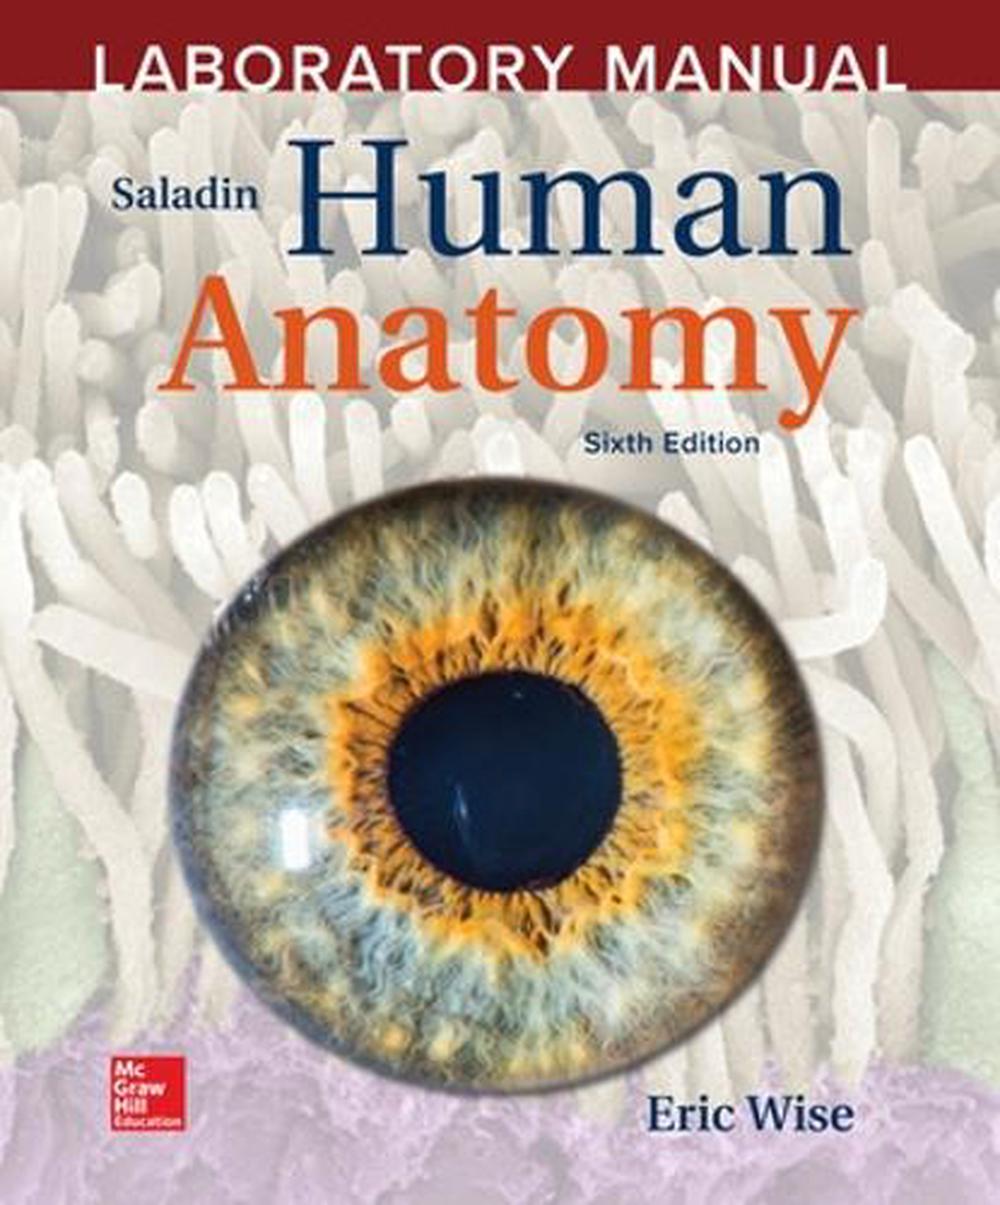 Laboratory Manual by Eric Wise to Saladin Human Anatomy by